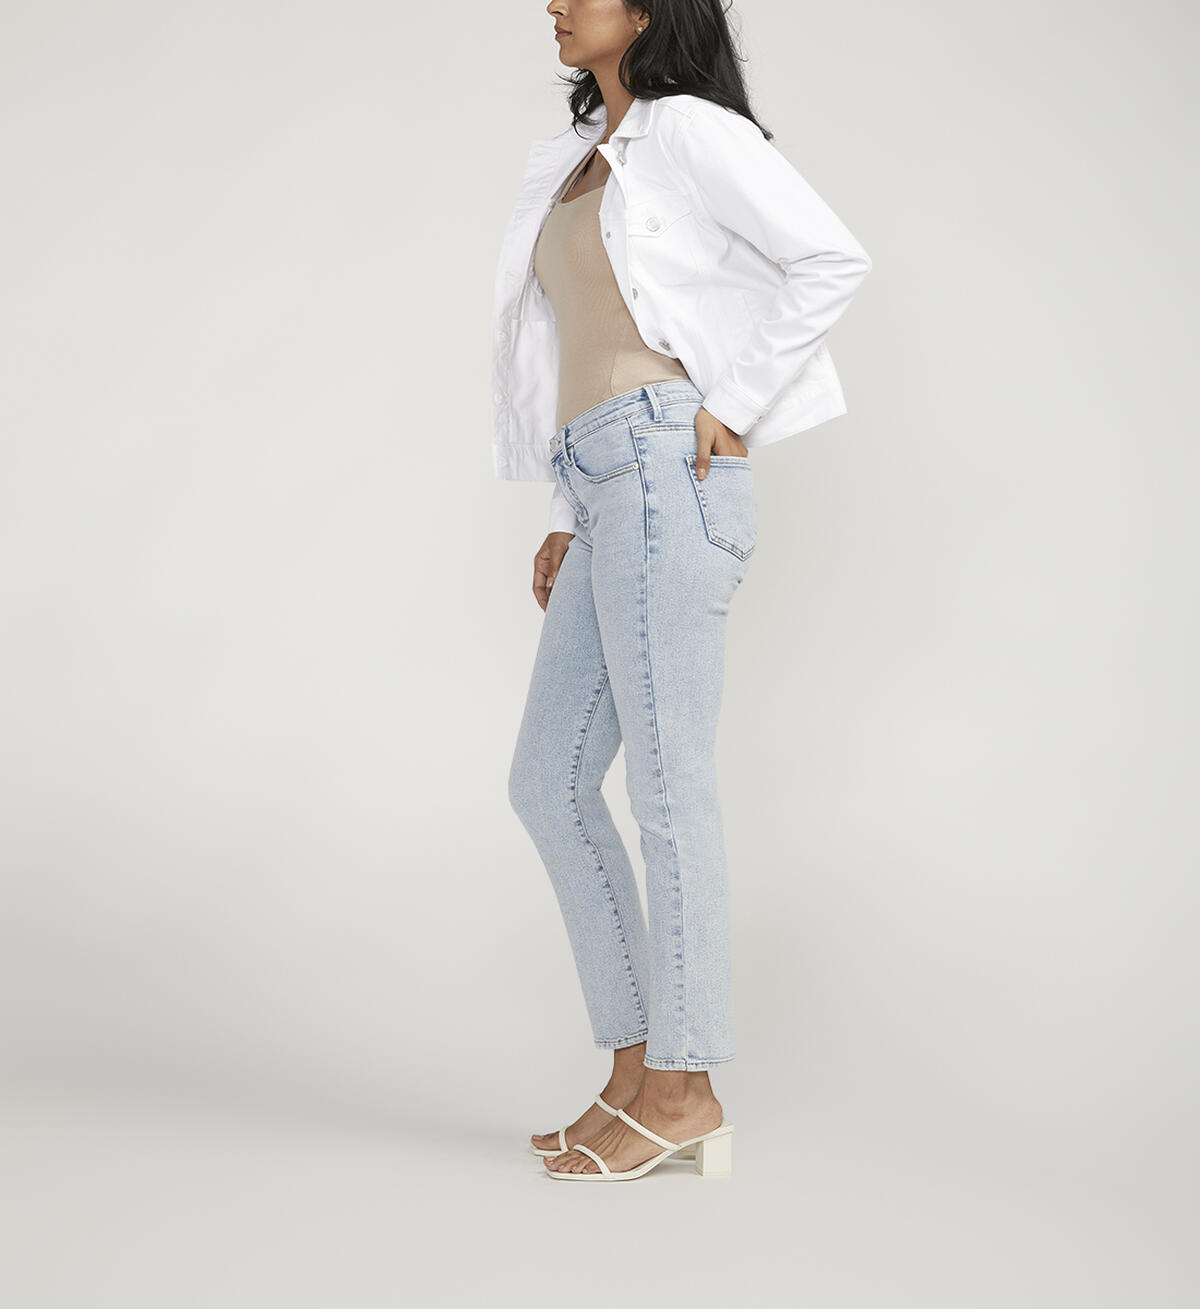 Cassie Mid Rise Straight Leg Jeans, Bali Blue, hi-res image number 2